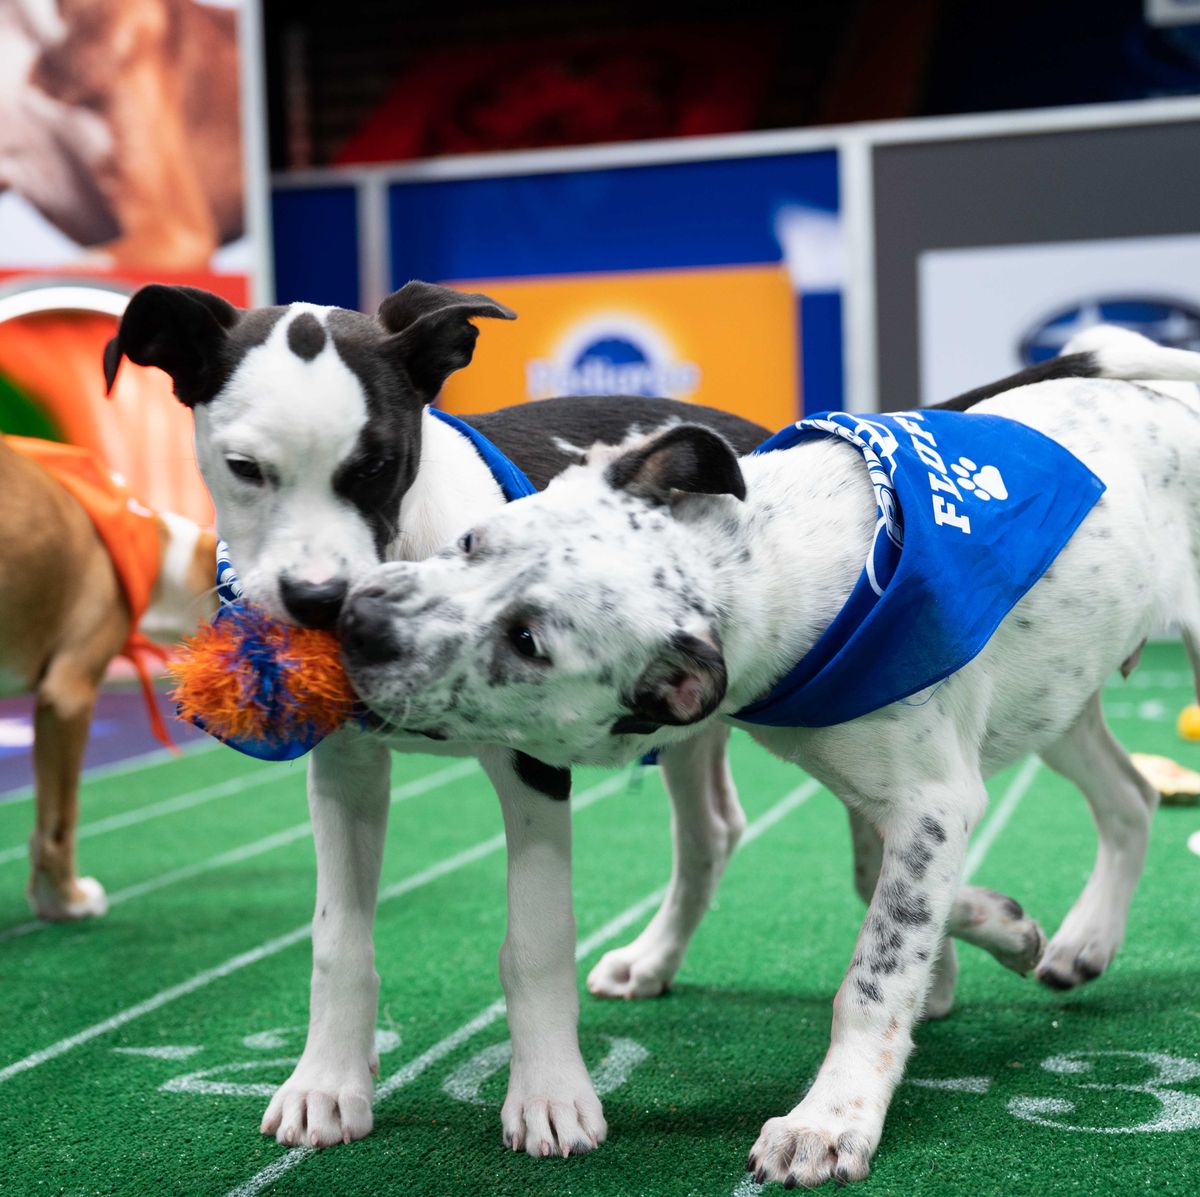 Puppy Bowl 2023 on Animal Planet - When Is the Puppy Bowl?